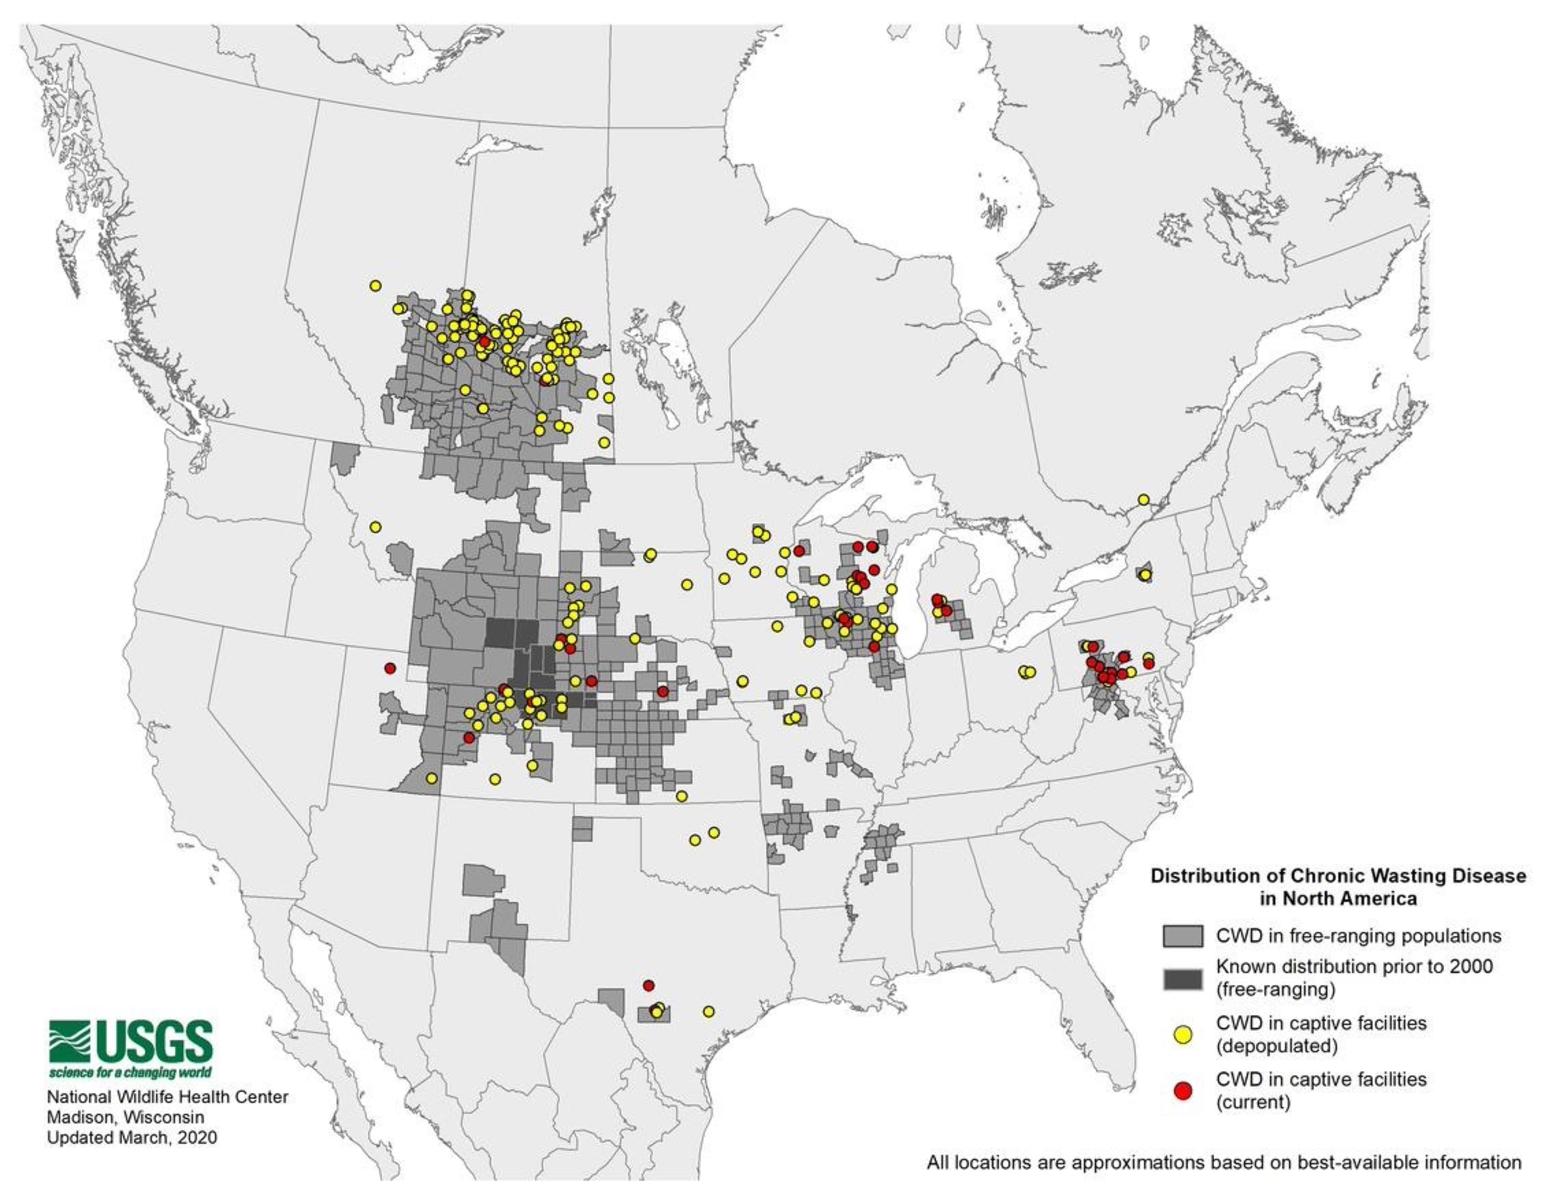 In this map provided by wildlife researchers with the US Geological Survey, the relationship between CWD and captive facilities is evident in the red and yellow dots.